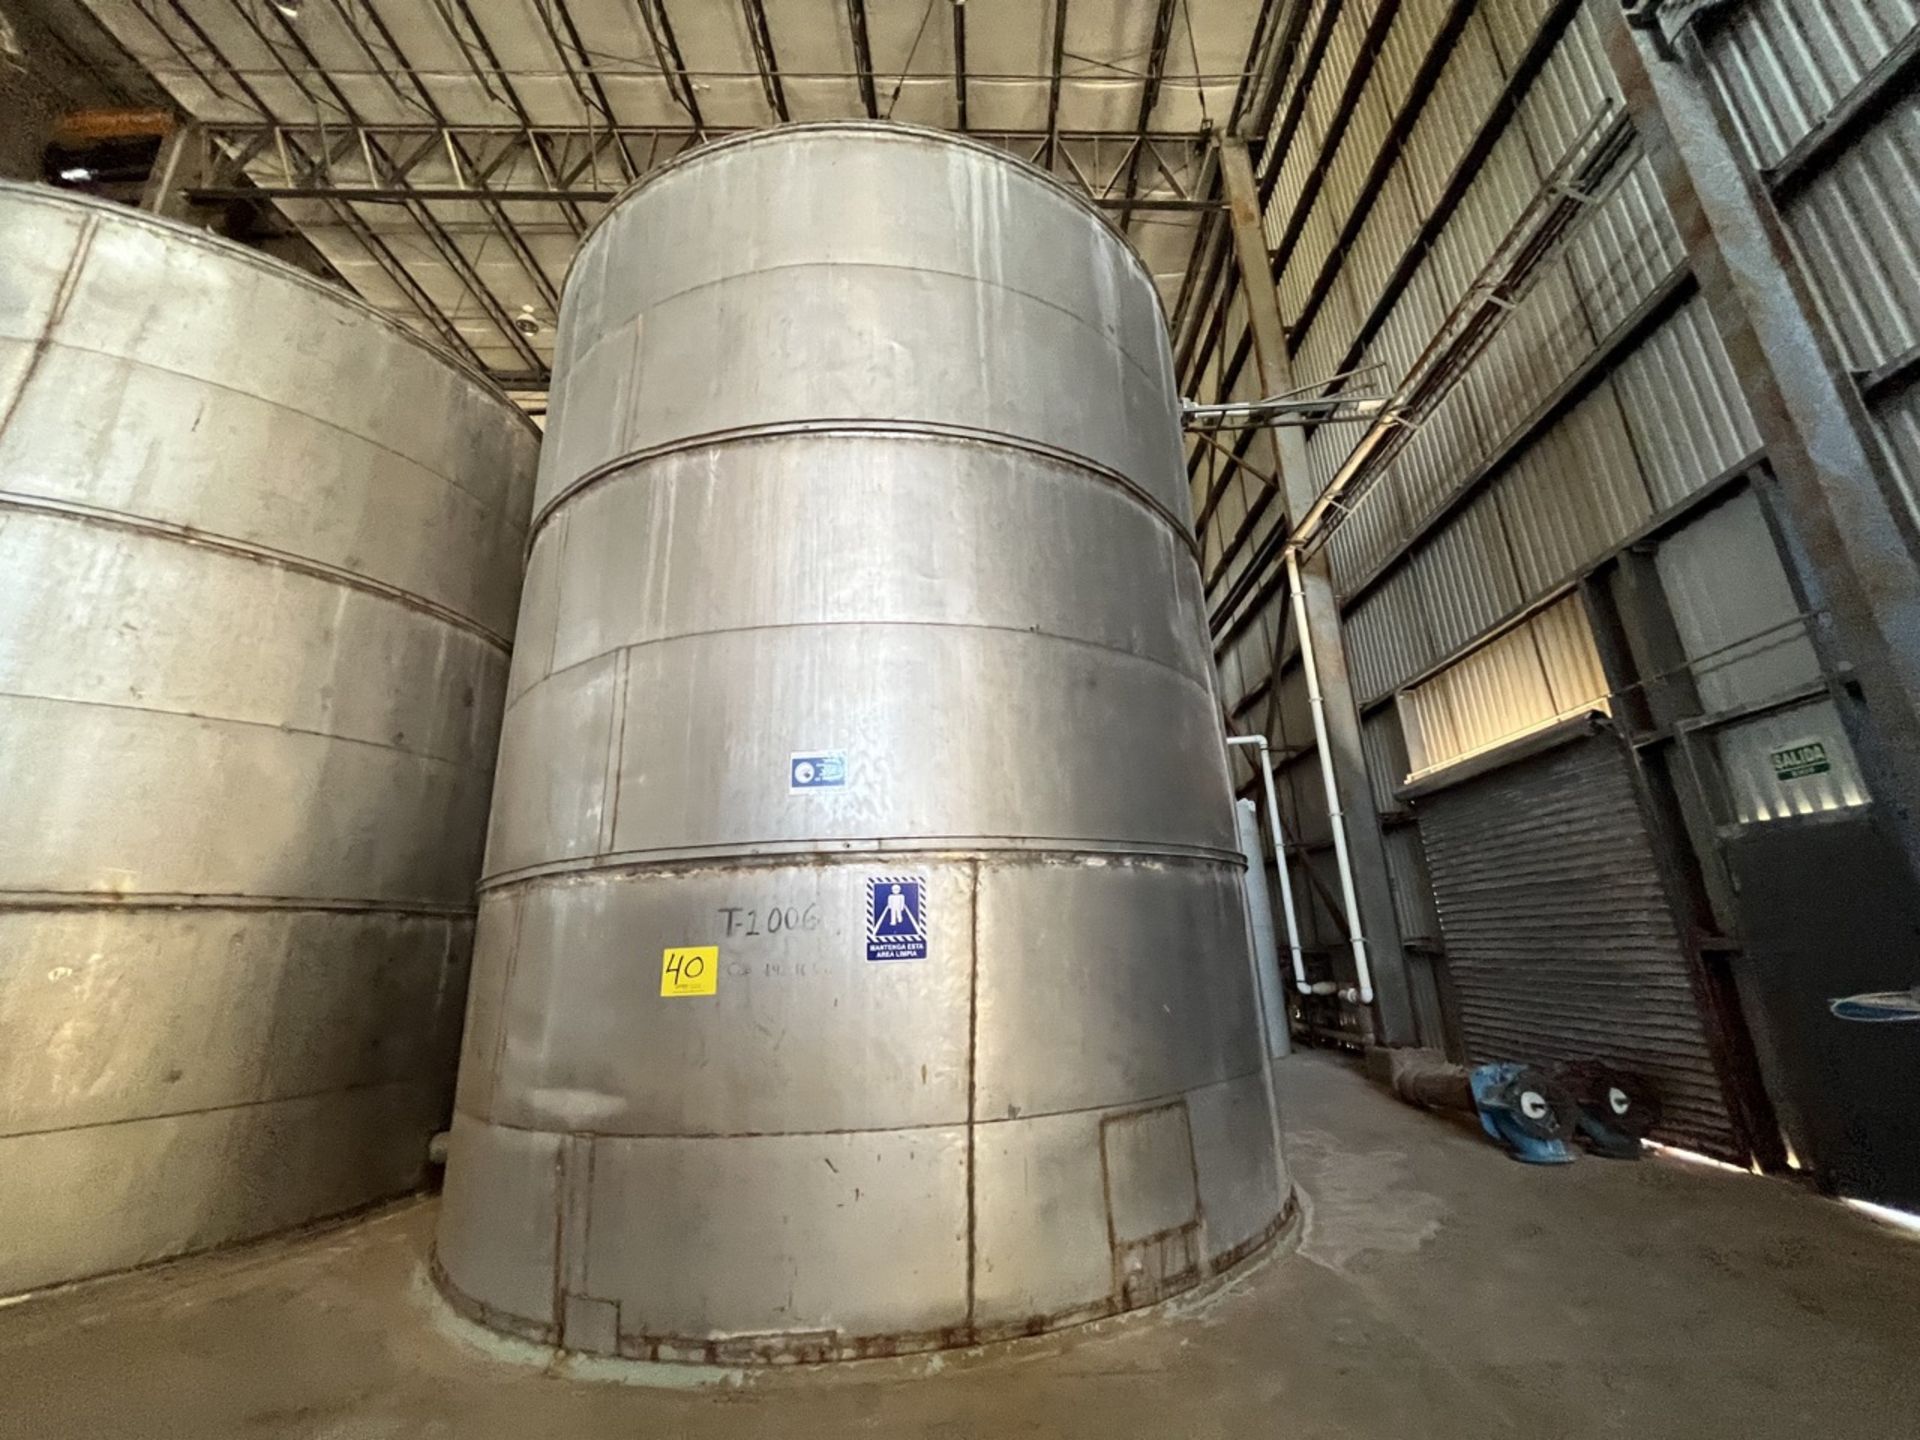 Stainless steel storage tank with a capacity of 192,163 liters, measuring approximately 6 meters in - Image 5 of 8